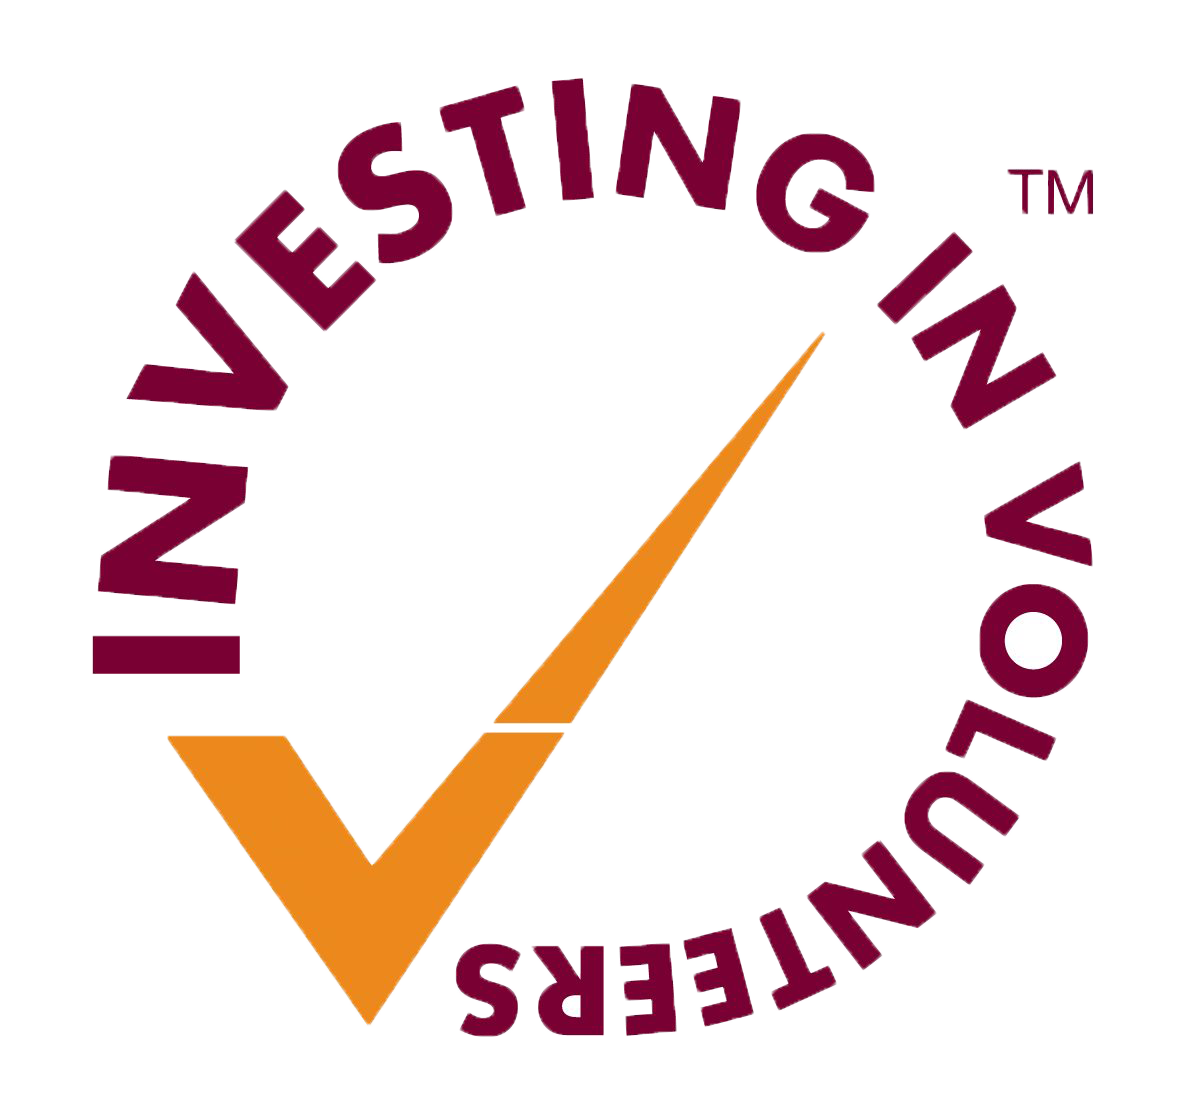 Investing in Volunteers logo. There is a red circle with a yellow tick going through it